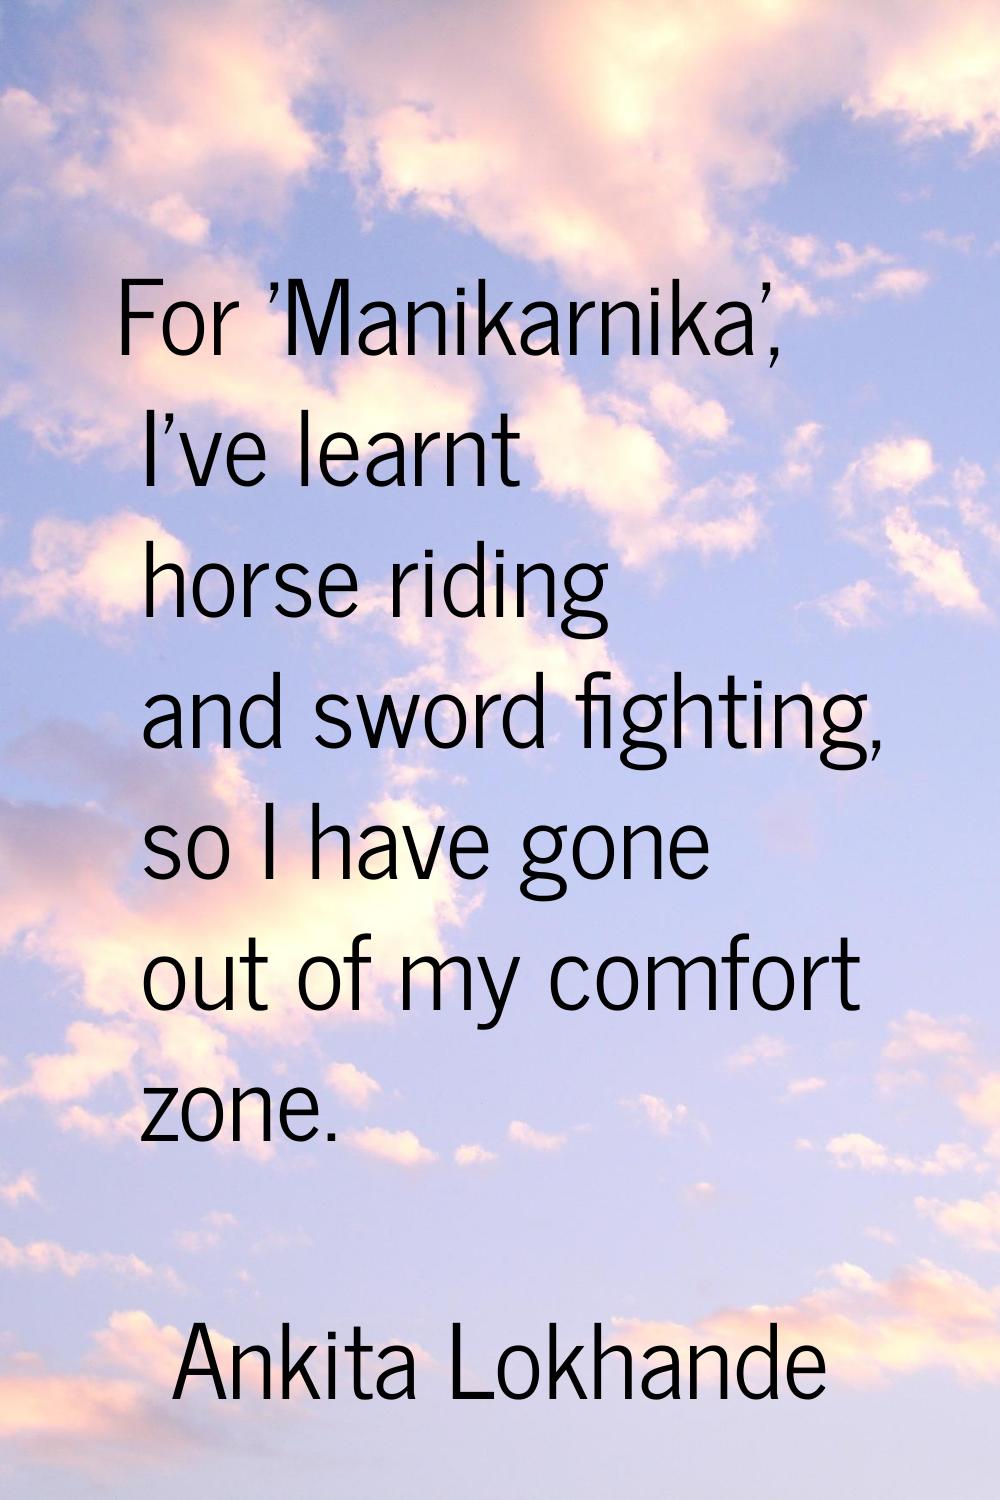 For 'Manikarnika', I've learnt horse riding and sword fighting, so I have gone out of my comfort zo